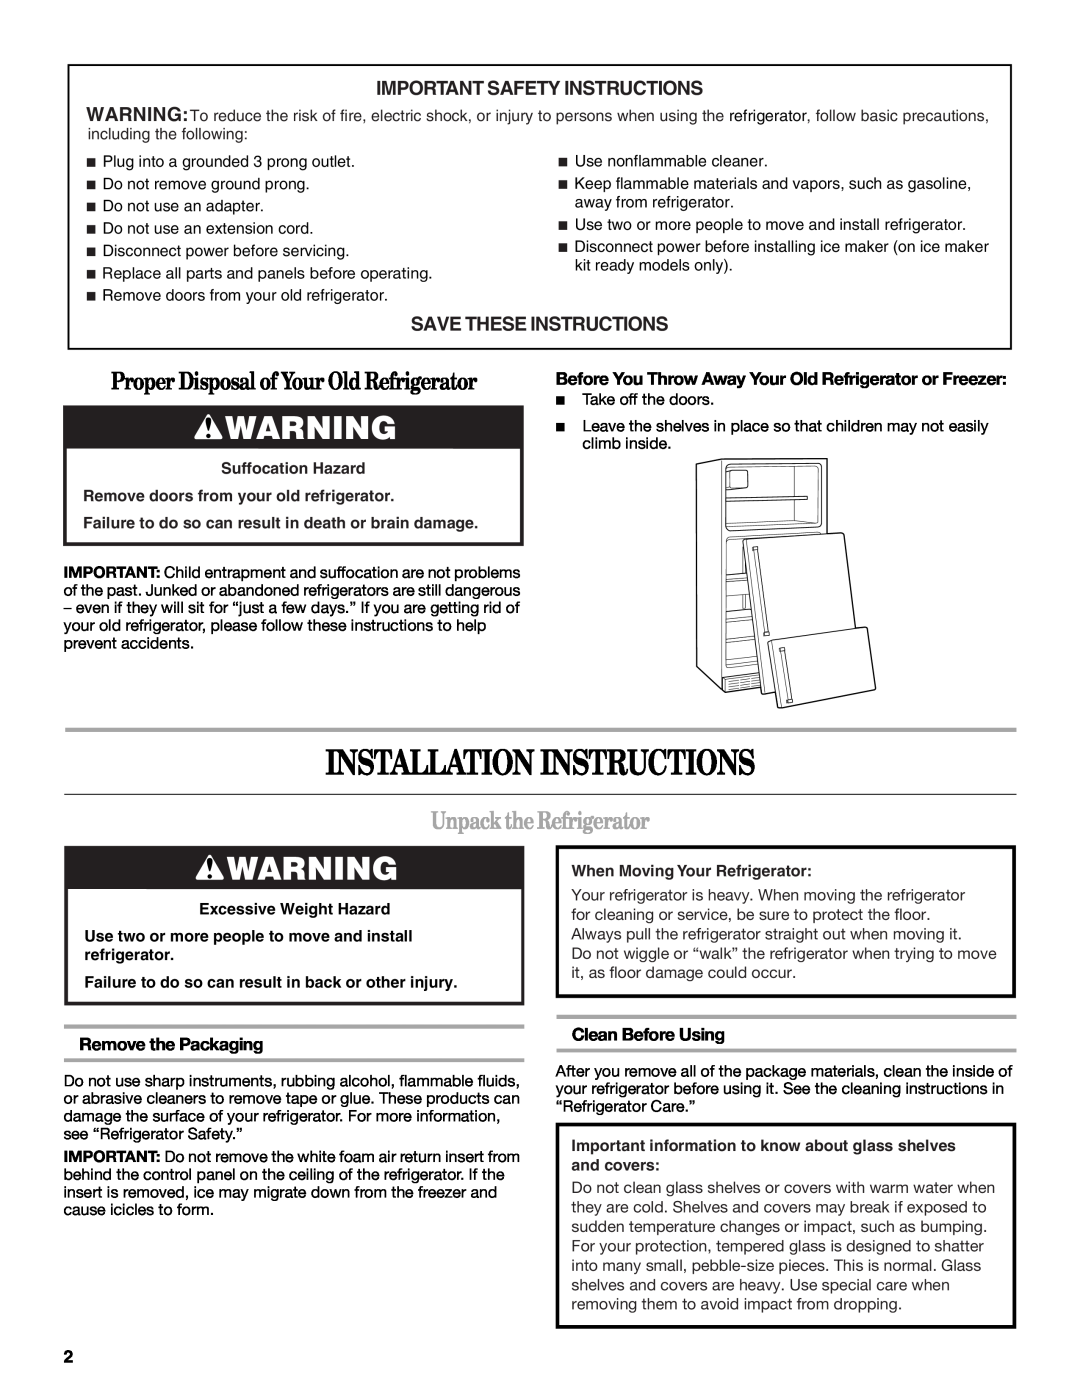 Whirlpool GR2FHTXV Installation Instructions, Unpack the Refrigerator, Important Safety Instructions, Remove the Packaging 